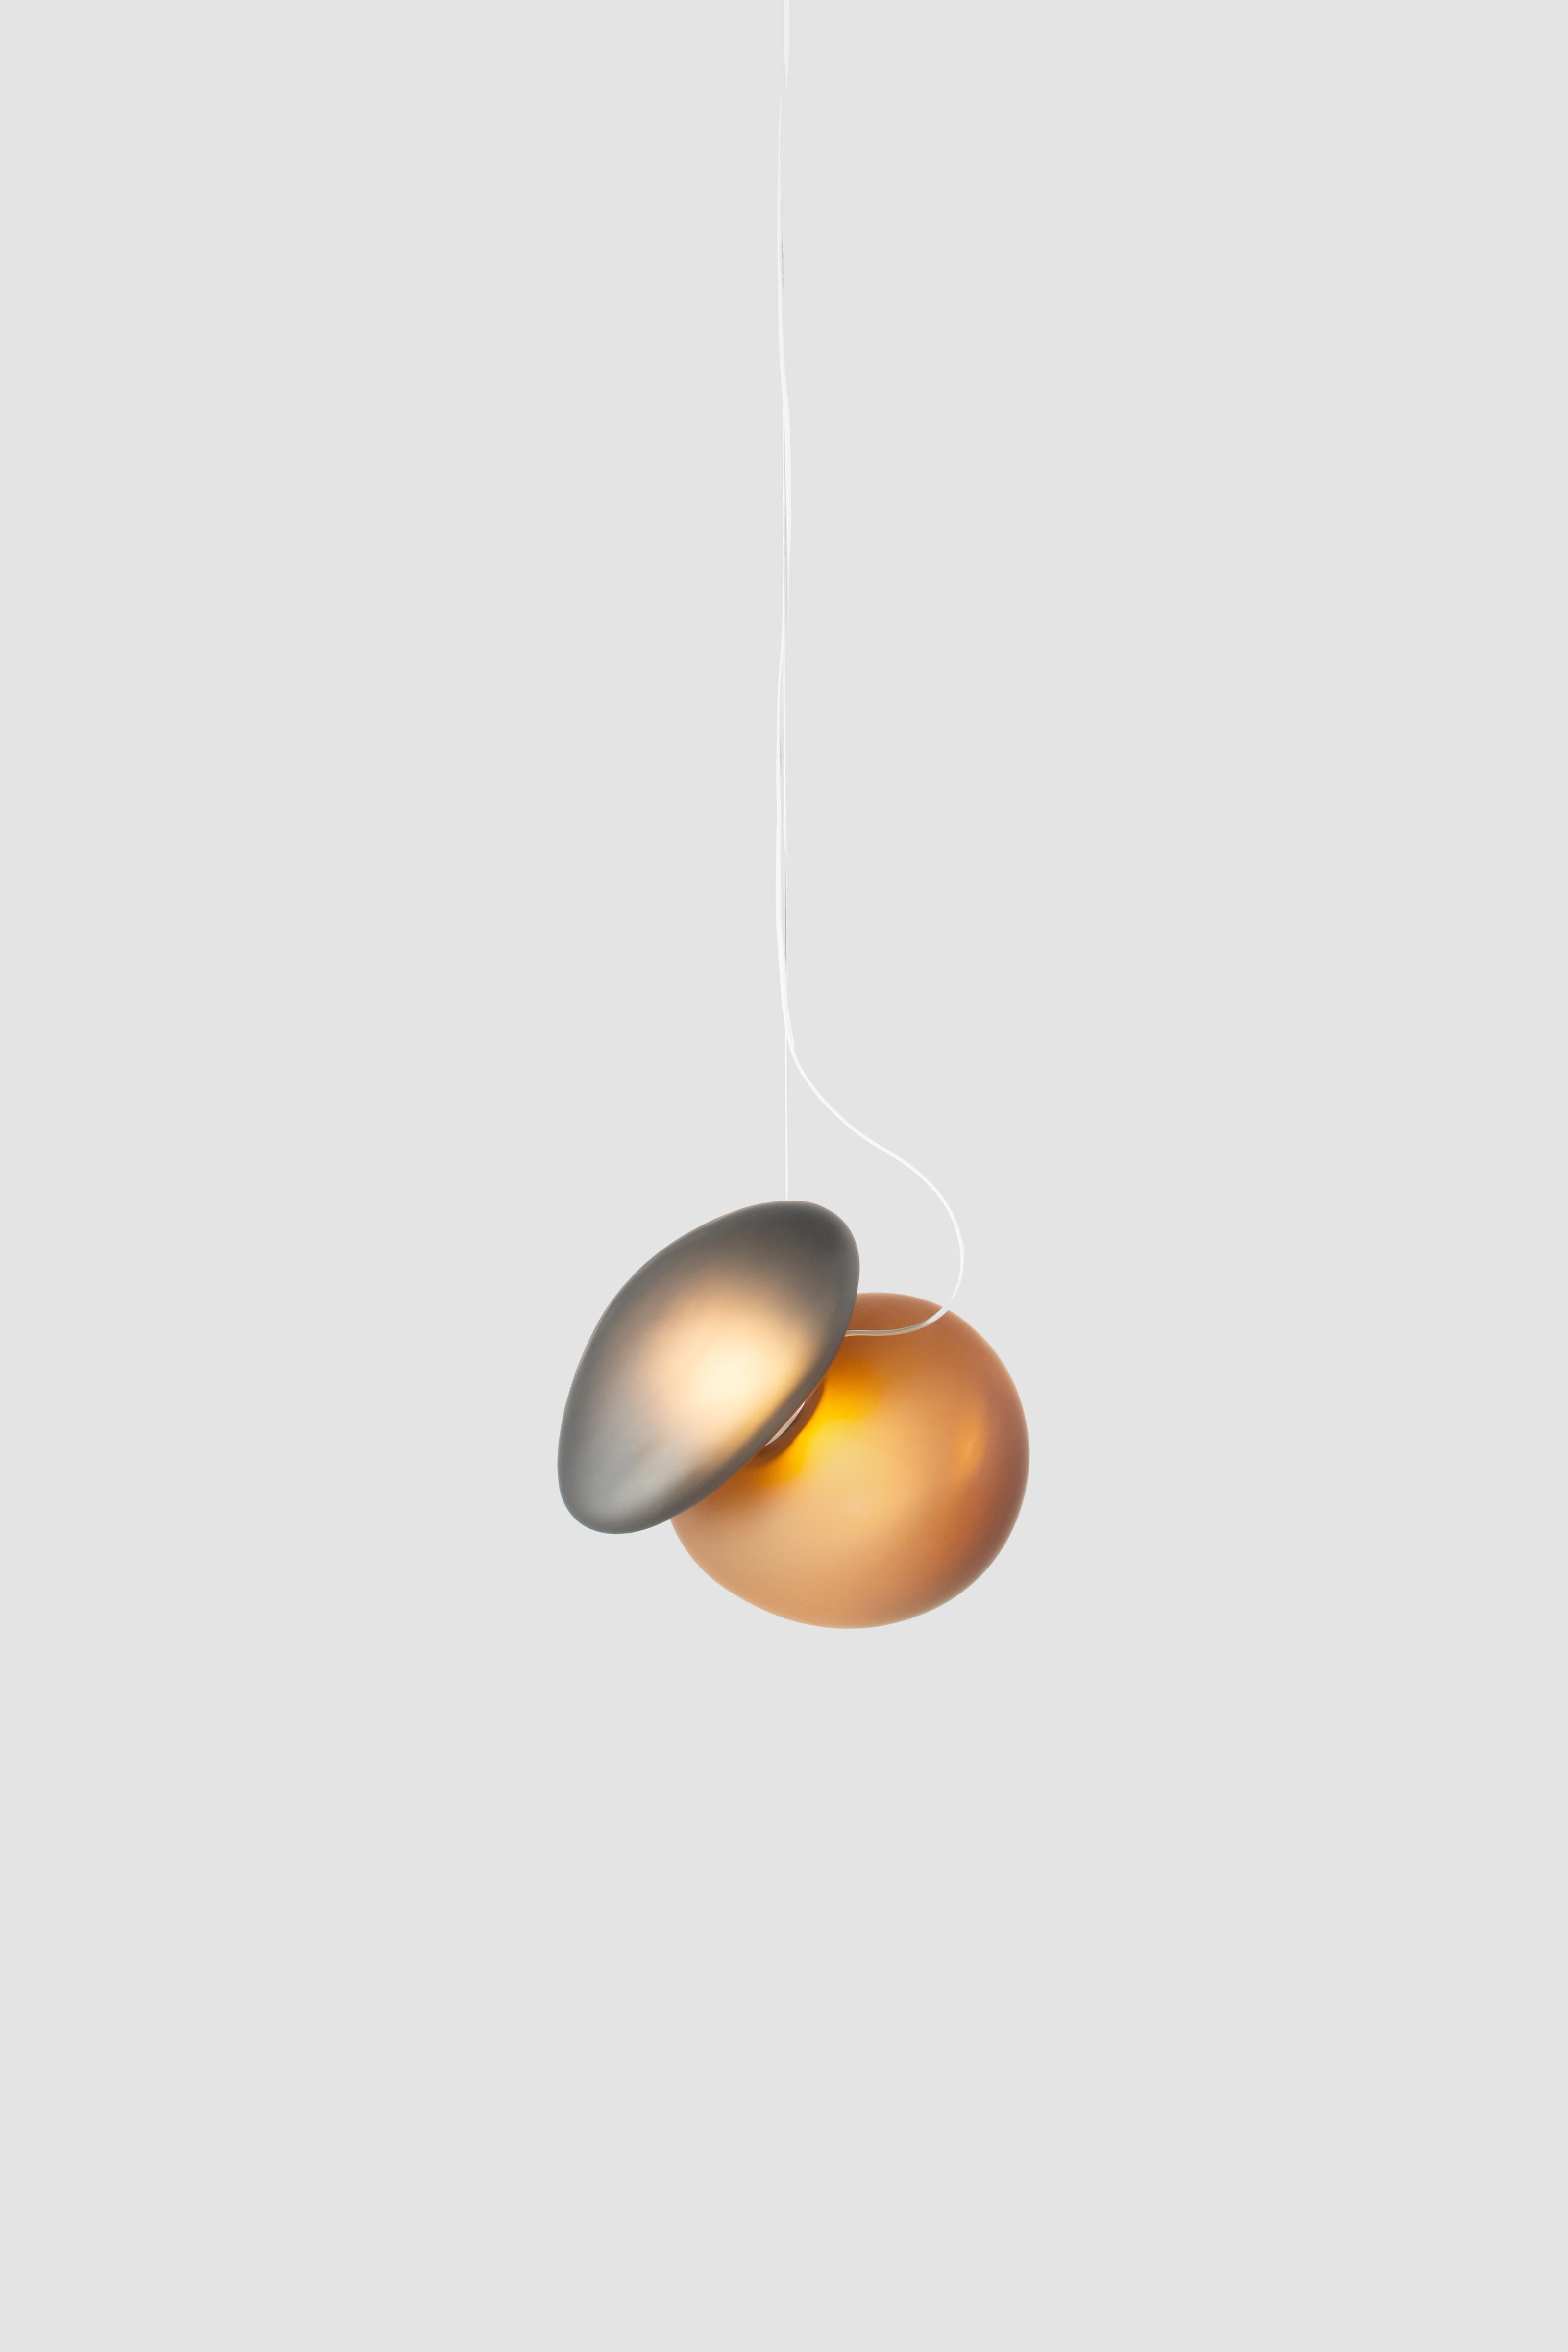 'Pebble' Contemporary pendant lamp 

Model in the picture: 
Color: Shape A (yellow citrine) C (grey slate)
Shapes: A + C

Wire length: 243 cm
Electrical: 14W LED 300ma, 2700K, Dimming: 0–10/ Triac

Available in white pearl, grey slate and